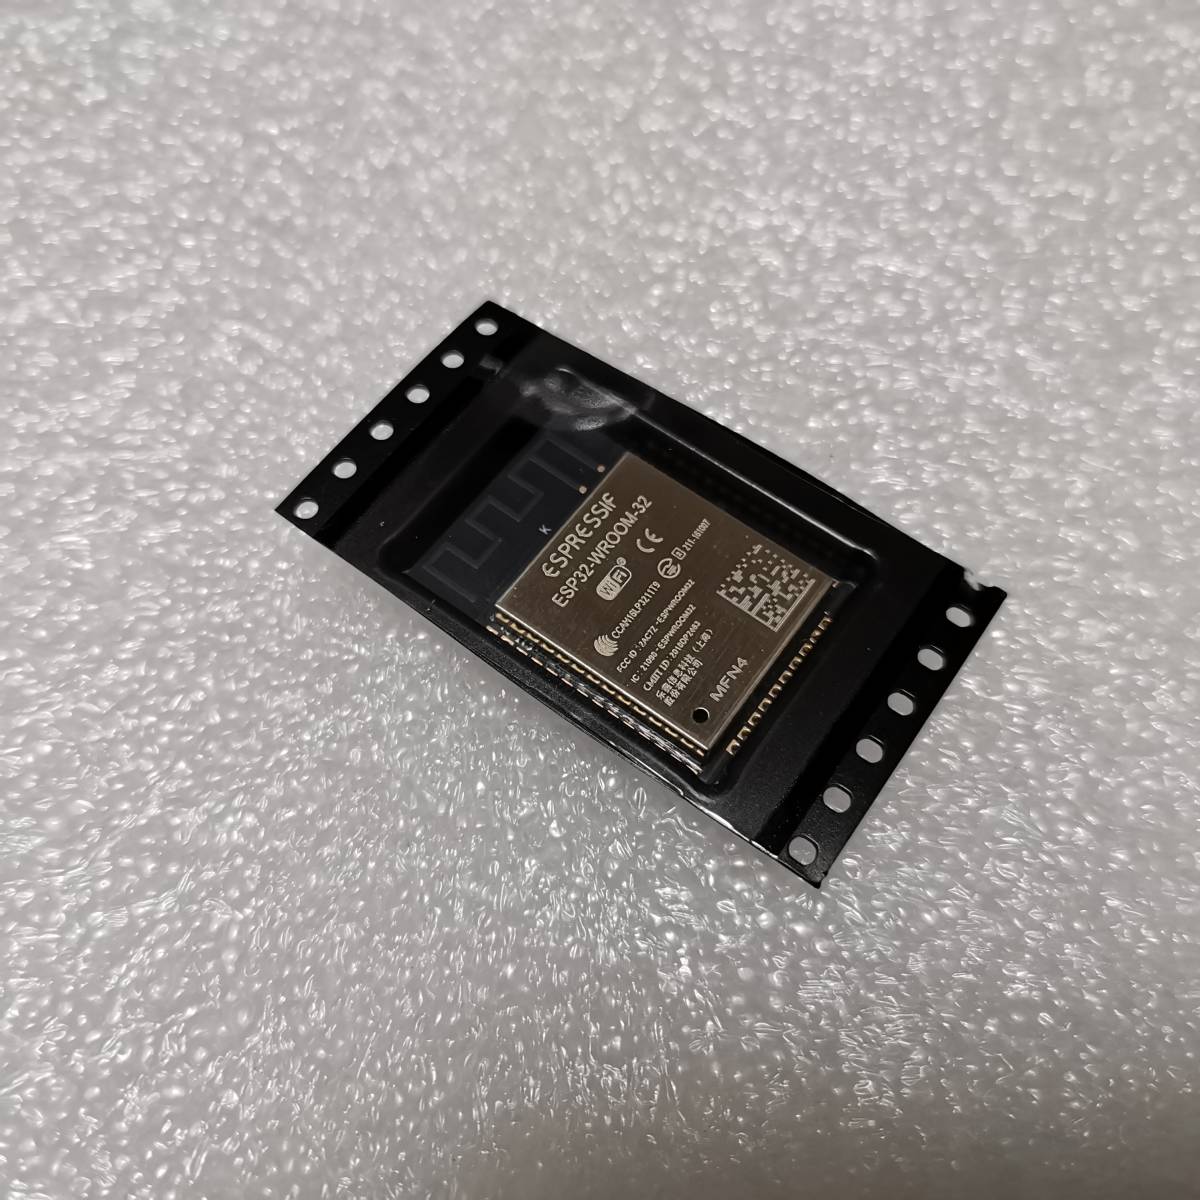 ESP32-WROOM-32 microcomputer Bluetooth Wi-Fi.. acquisition ending 